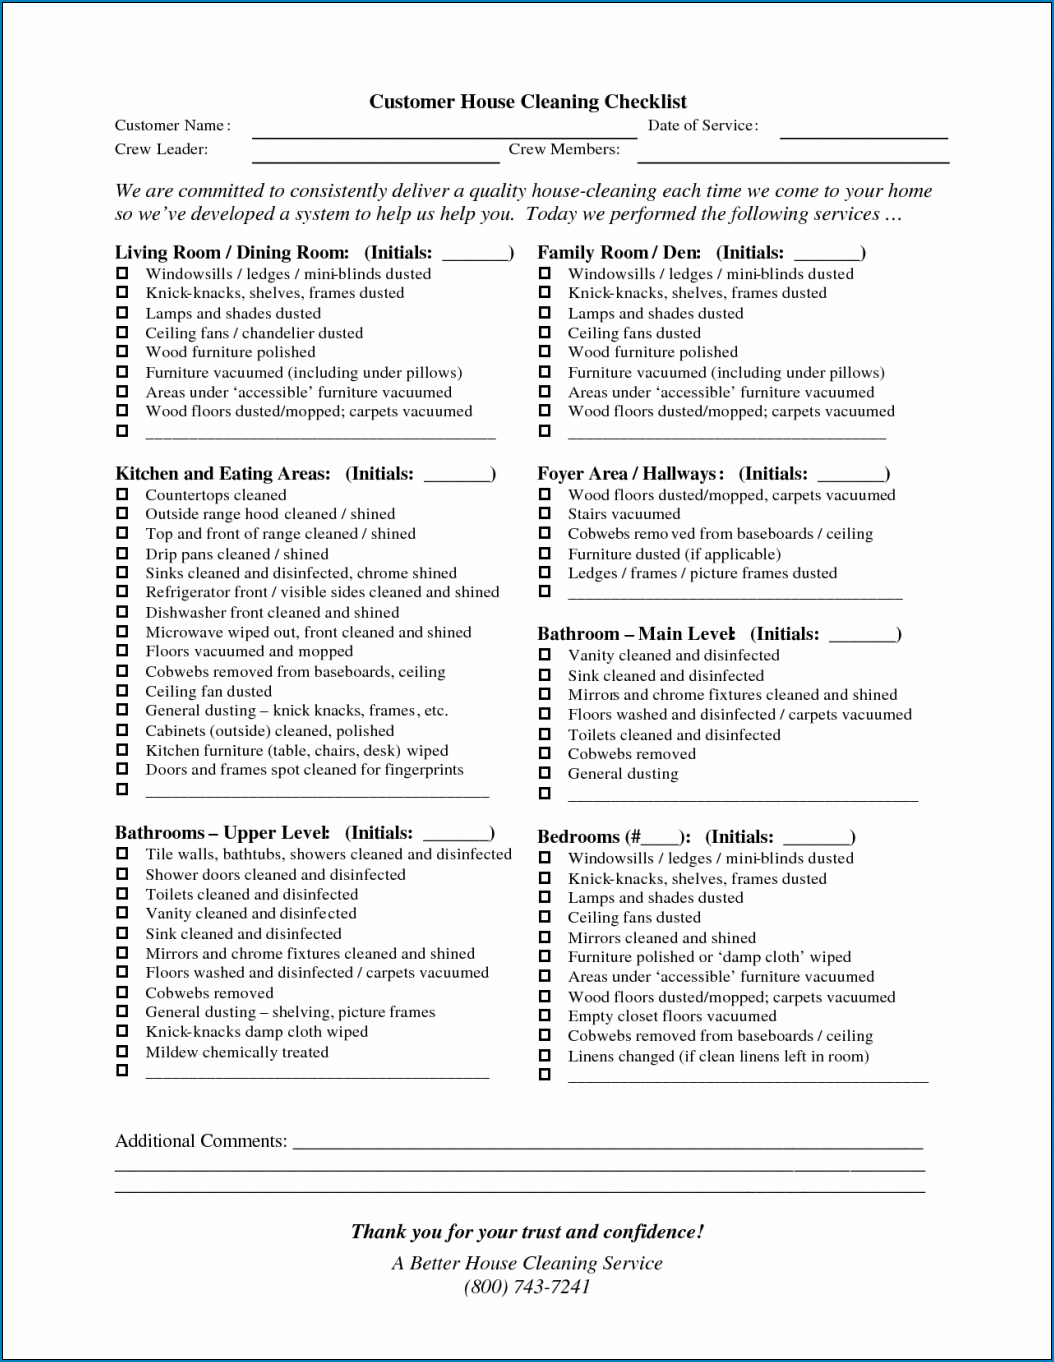 Example of Professional House Cleaning Checklist Template